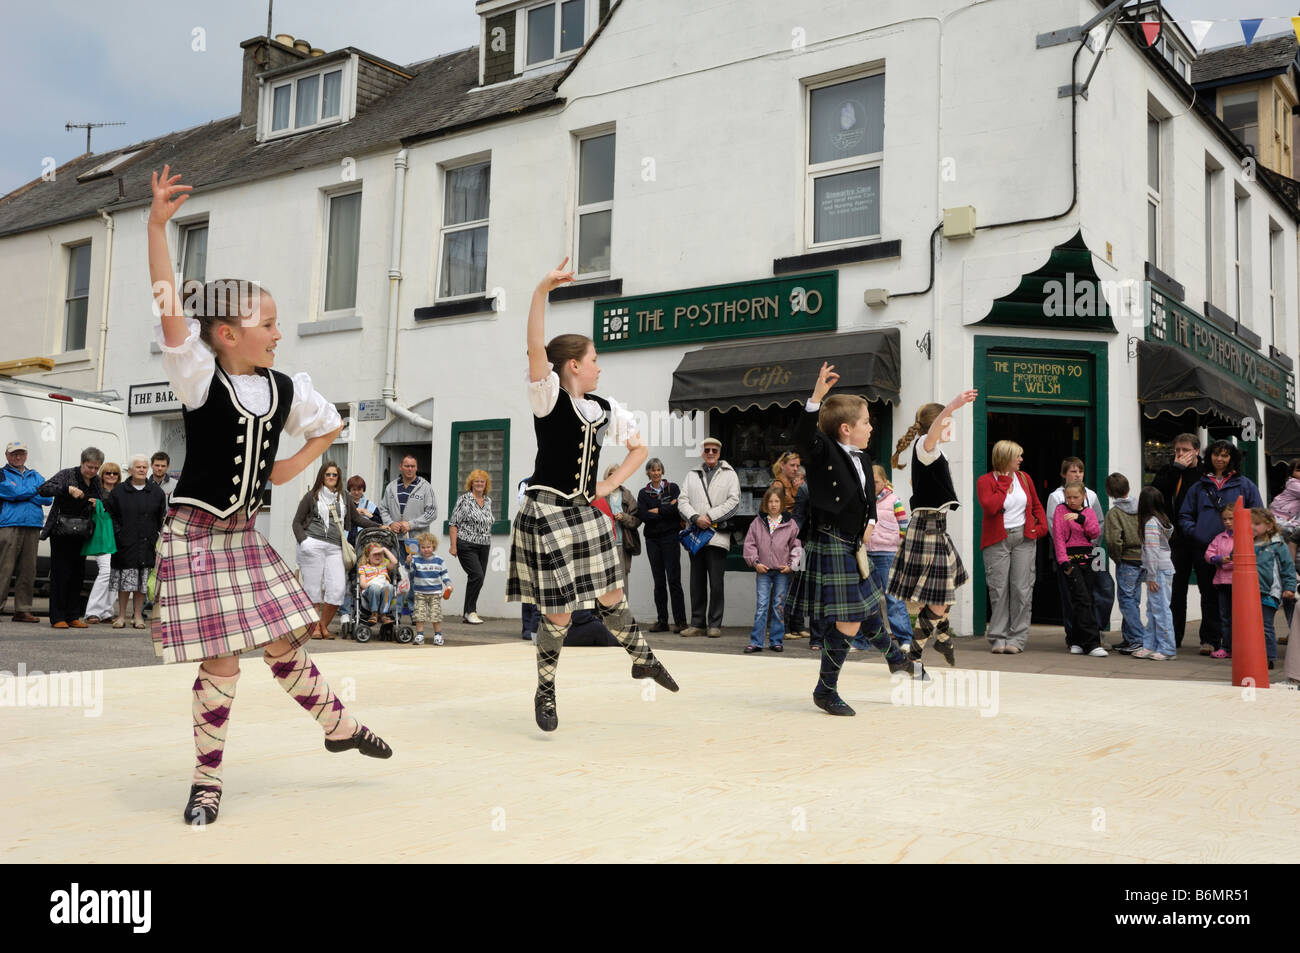 Traditional Scottish Dancing at Castle Douglas Food Town Day, Dumfries & Galloway, Scotland Stock Photo